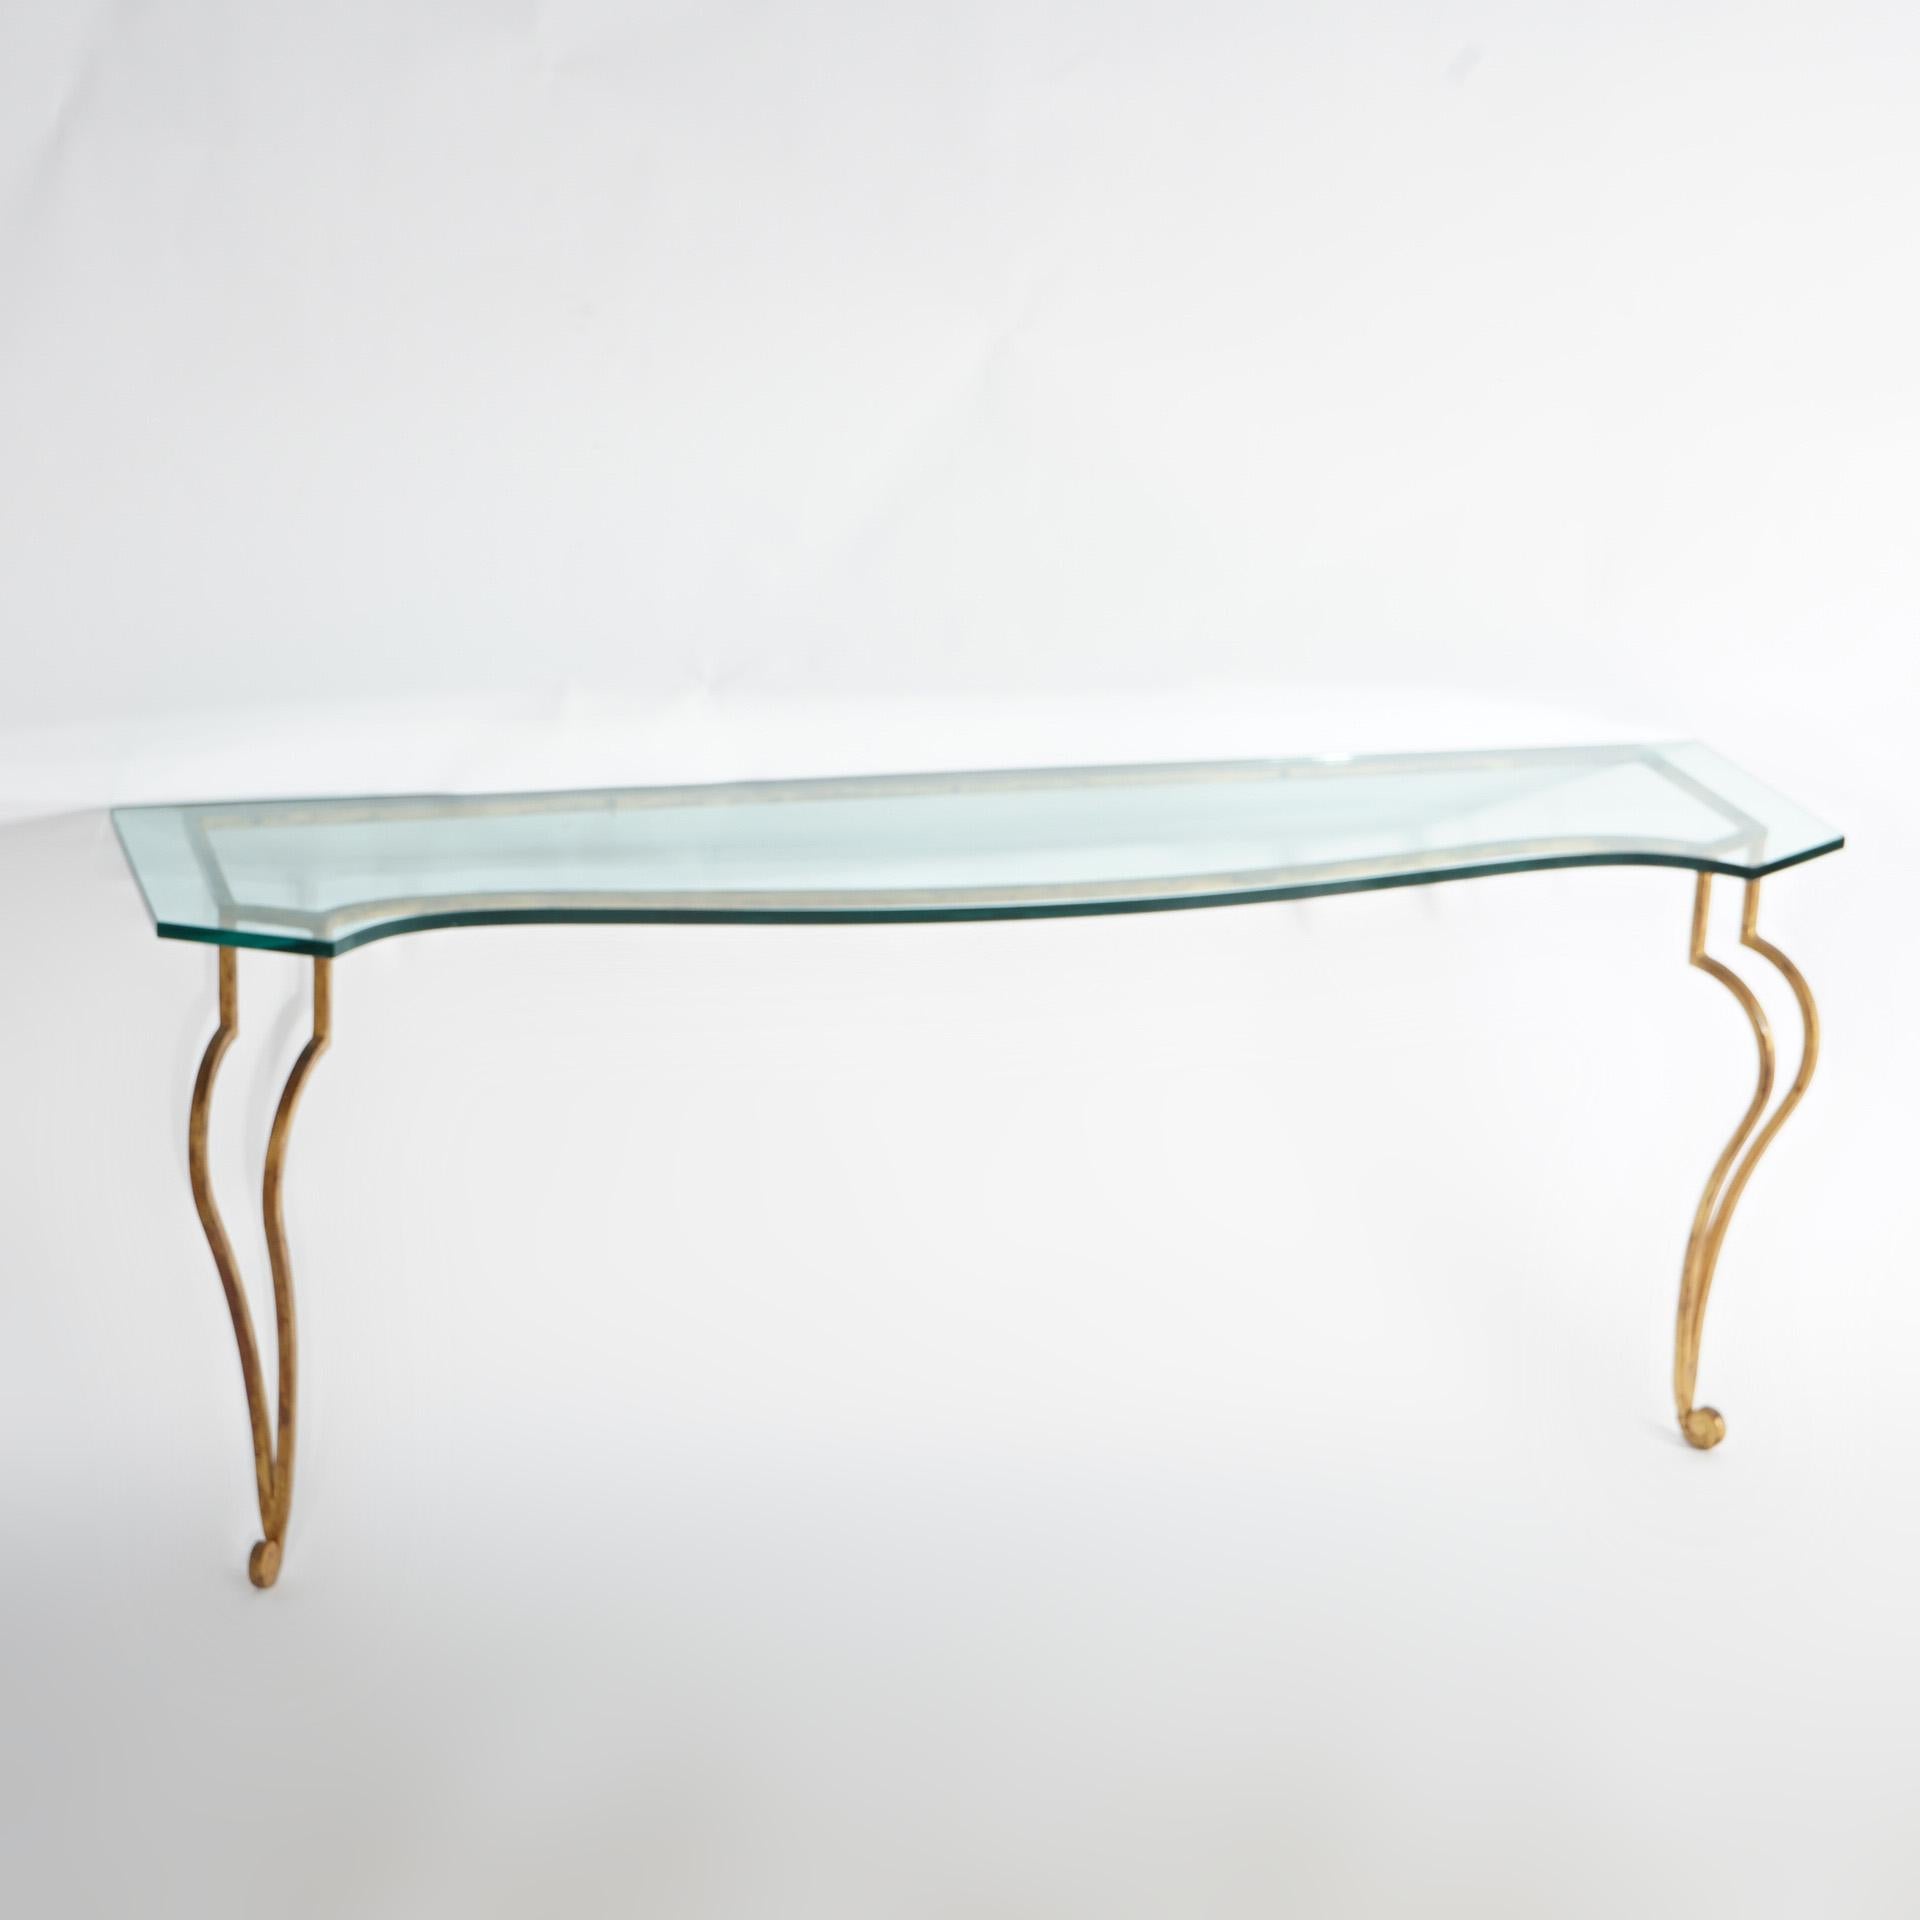 An Italian wall console table offers gilt wrought iron frame with scrolled cabriole legs and shaped glass top, 20th century

Measures - 28.25